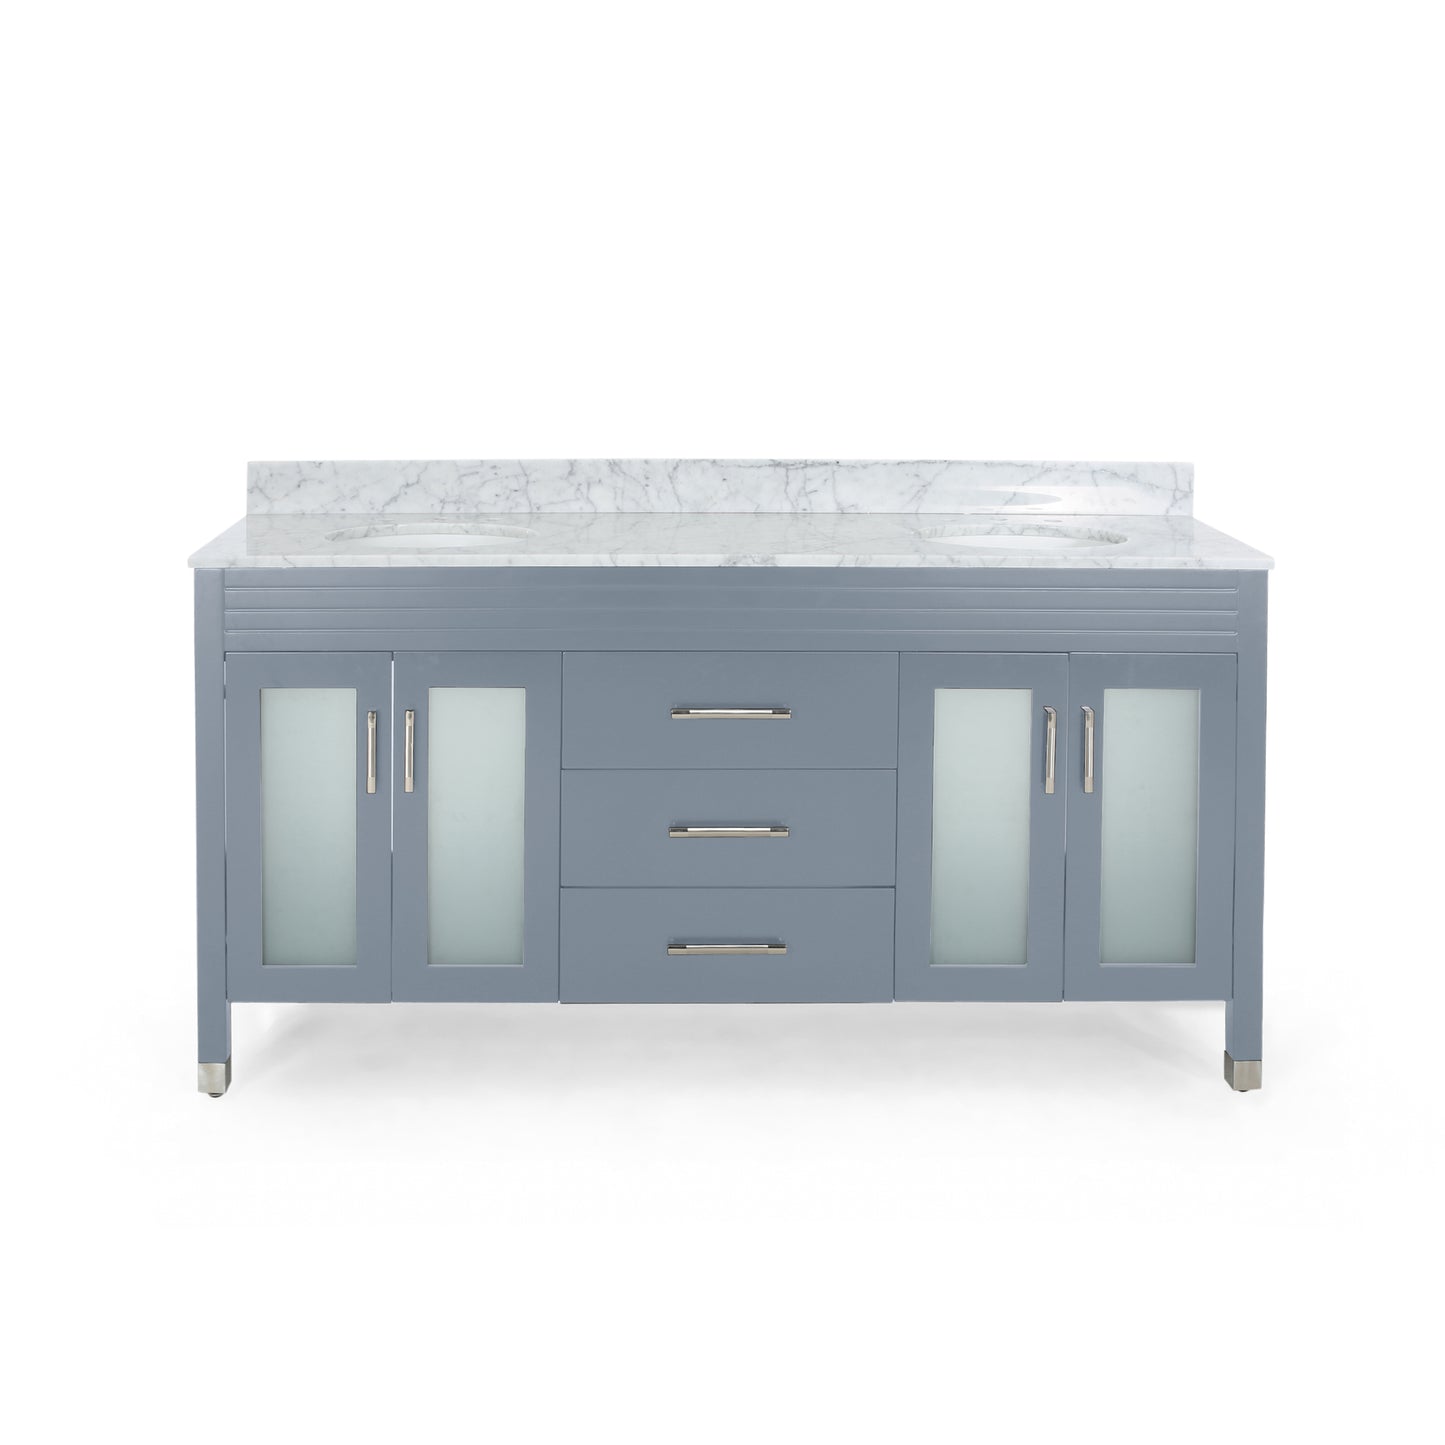 Holdame Contemporary 72" Wood Double Sink Bathroom Vanity with Marble Counter Top with Carrara White Marble